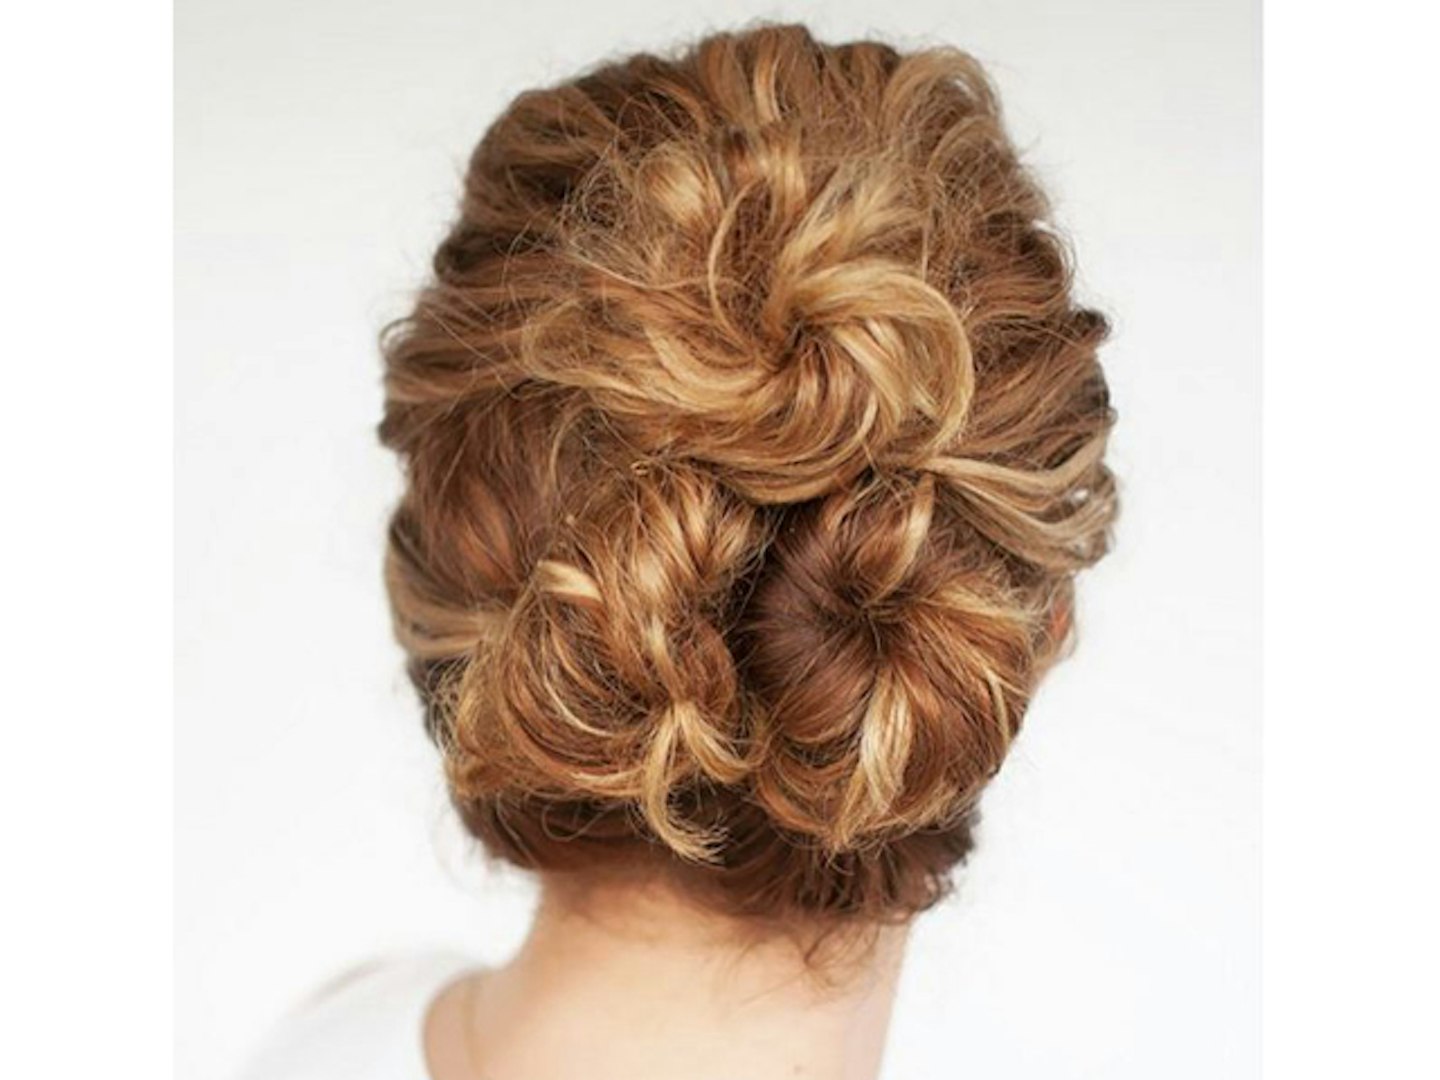 Next Day Hairstyles